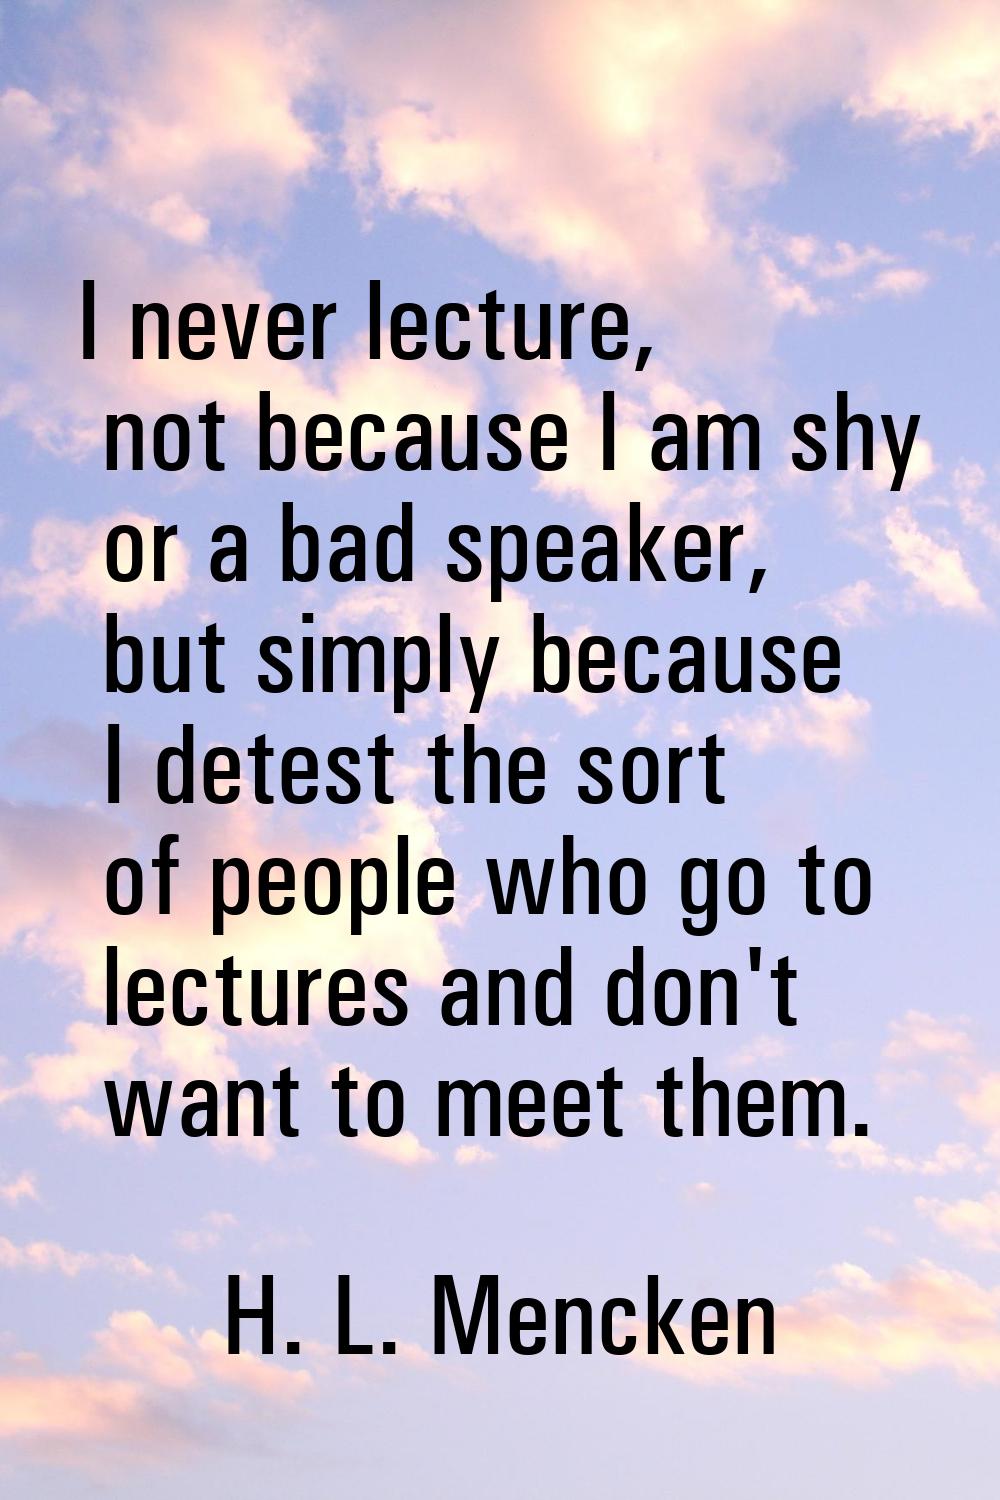 I never lecture, not because I am shy or a bad speaker, but simply because I detest the sort of peo